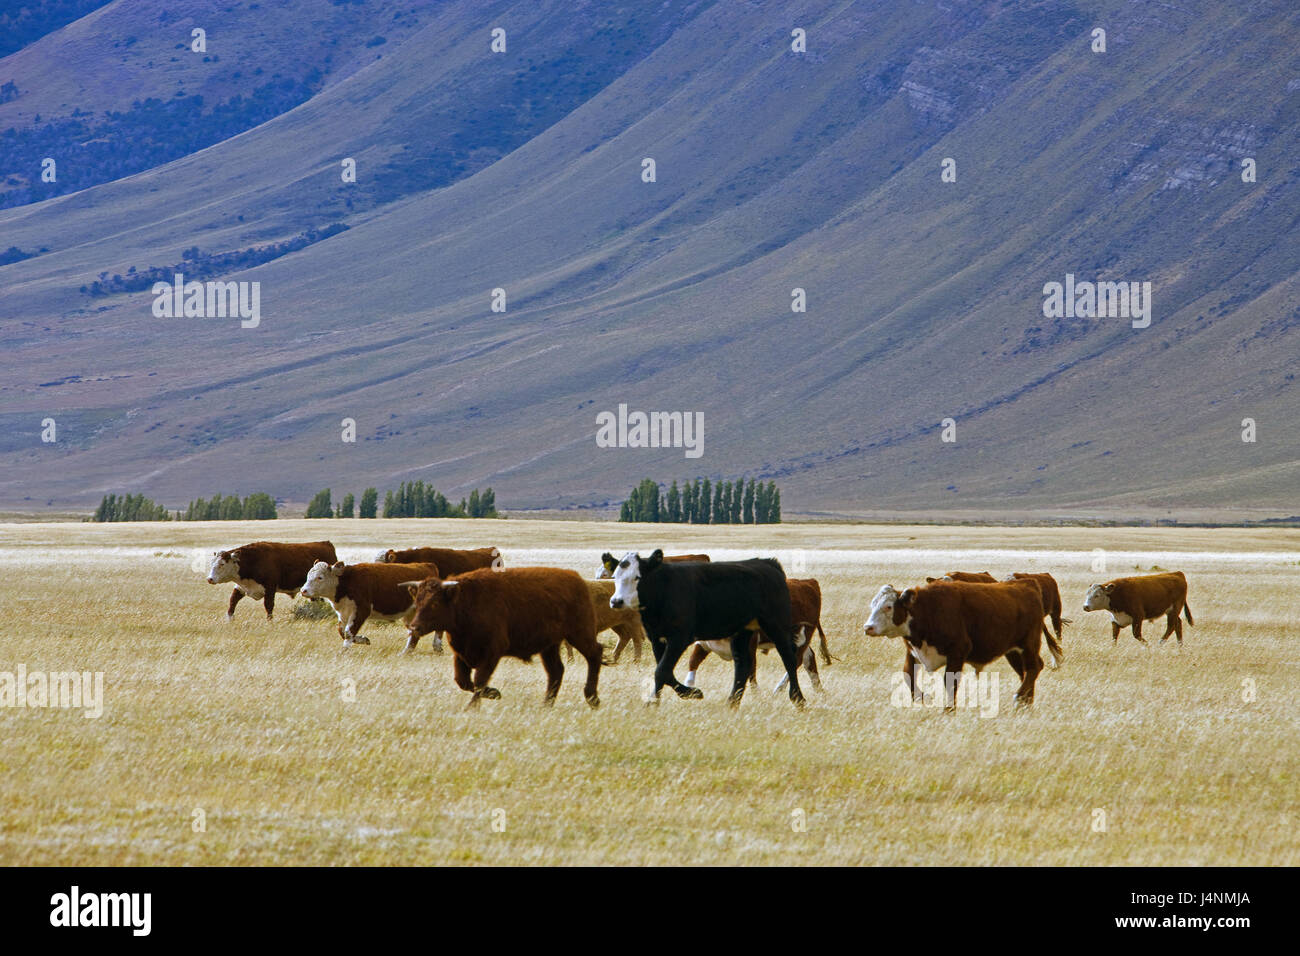 Chile, Patagonia, scenery, cow's focuses, Stock Photo